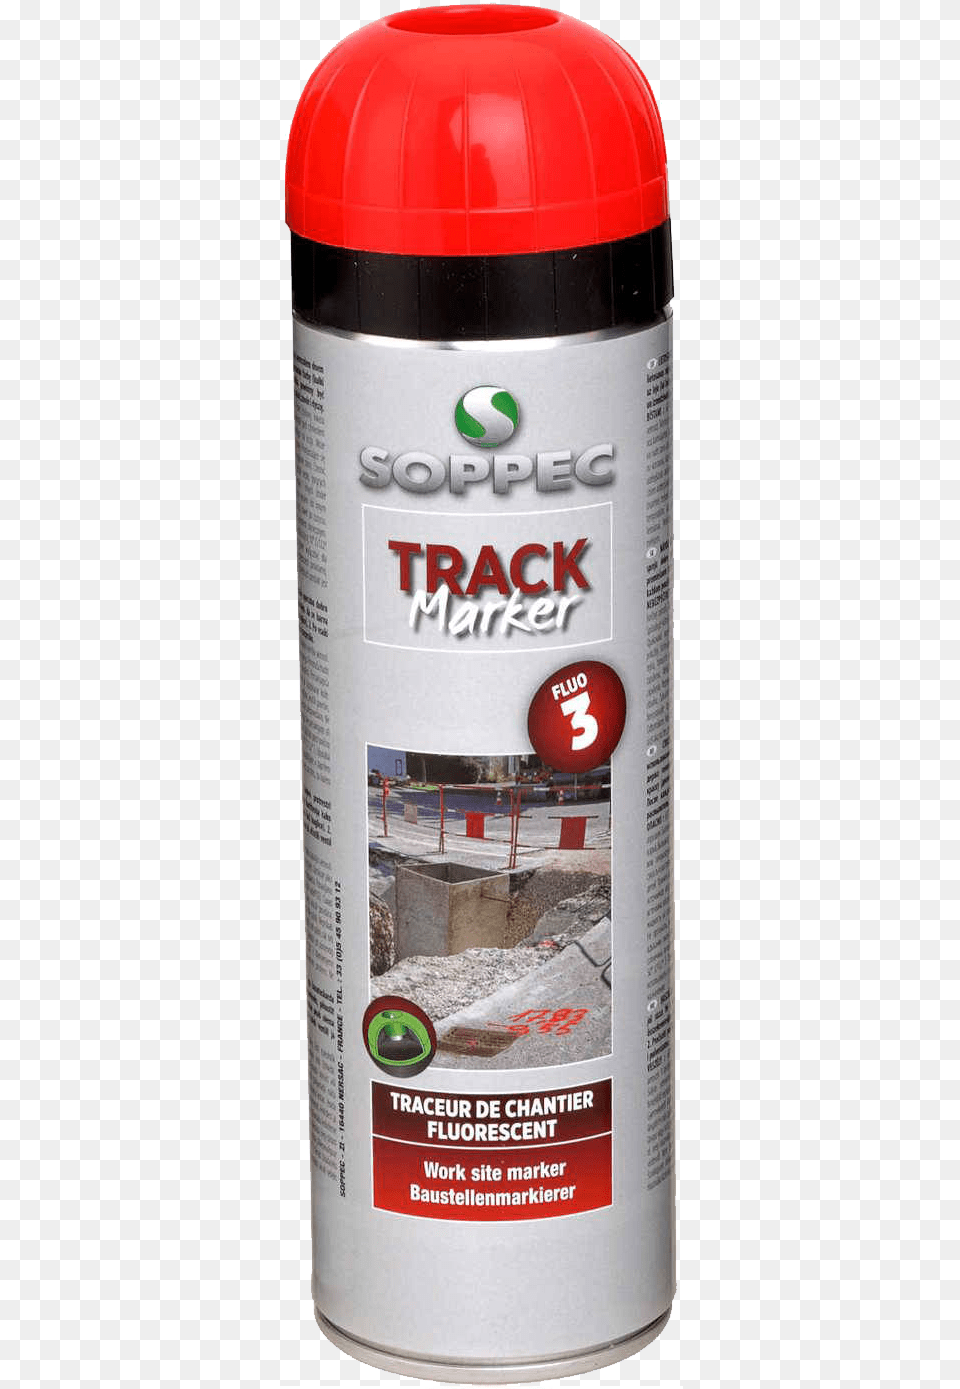 Red Spray Paint 500 Ml Soppec Track Marker Bottle, Tin, Can Free Transparent Png